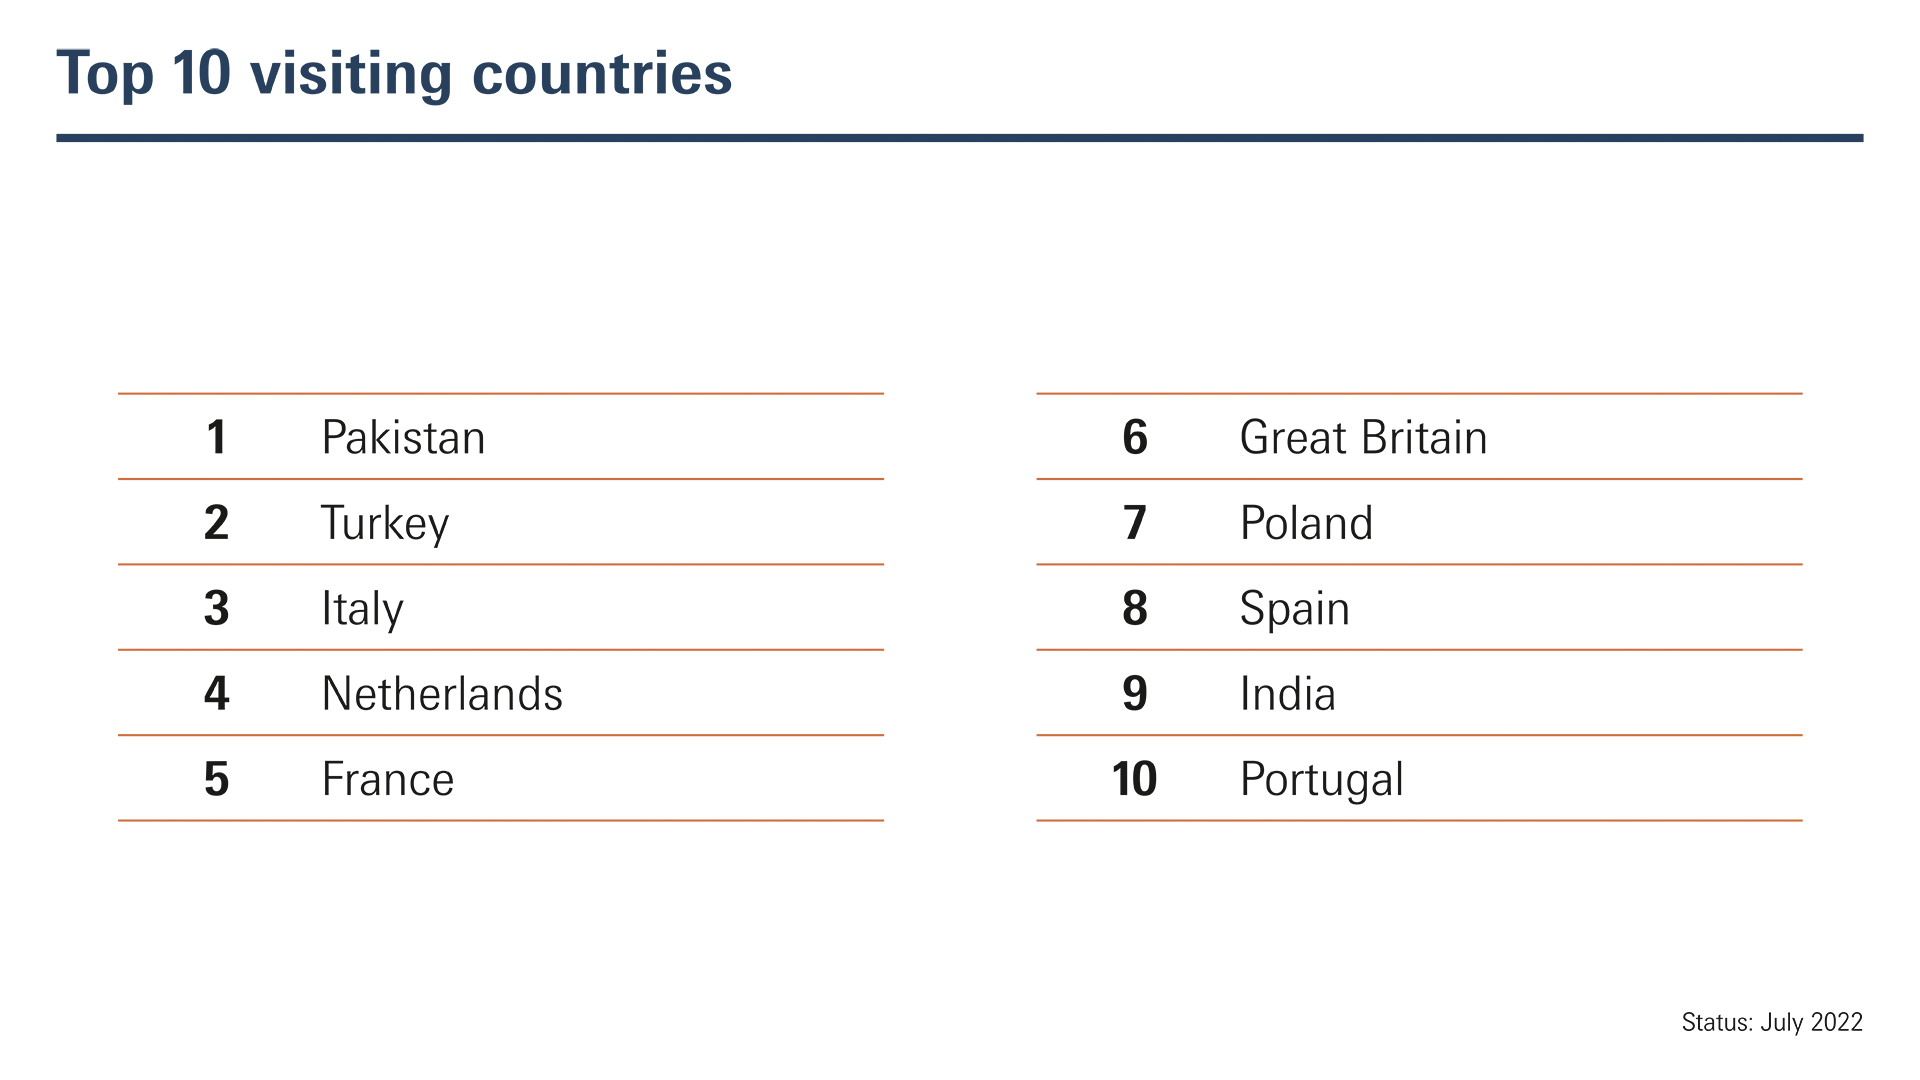 Top 10 visiting countries